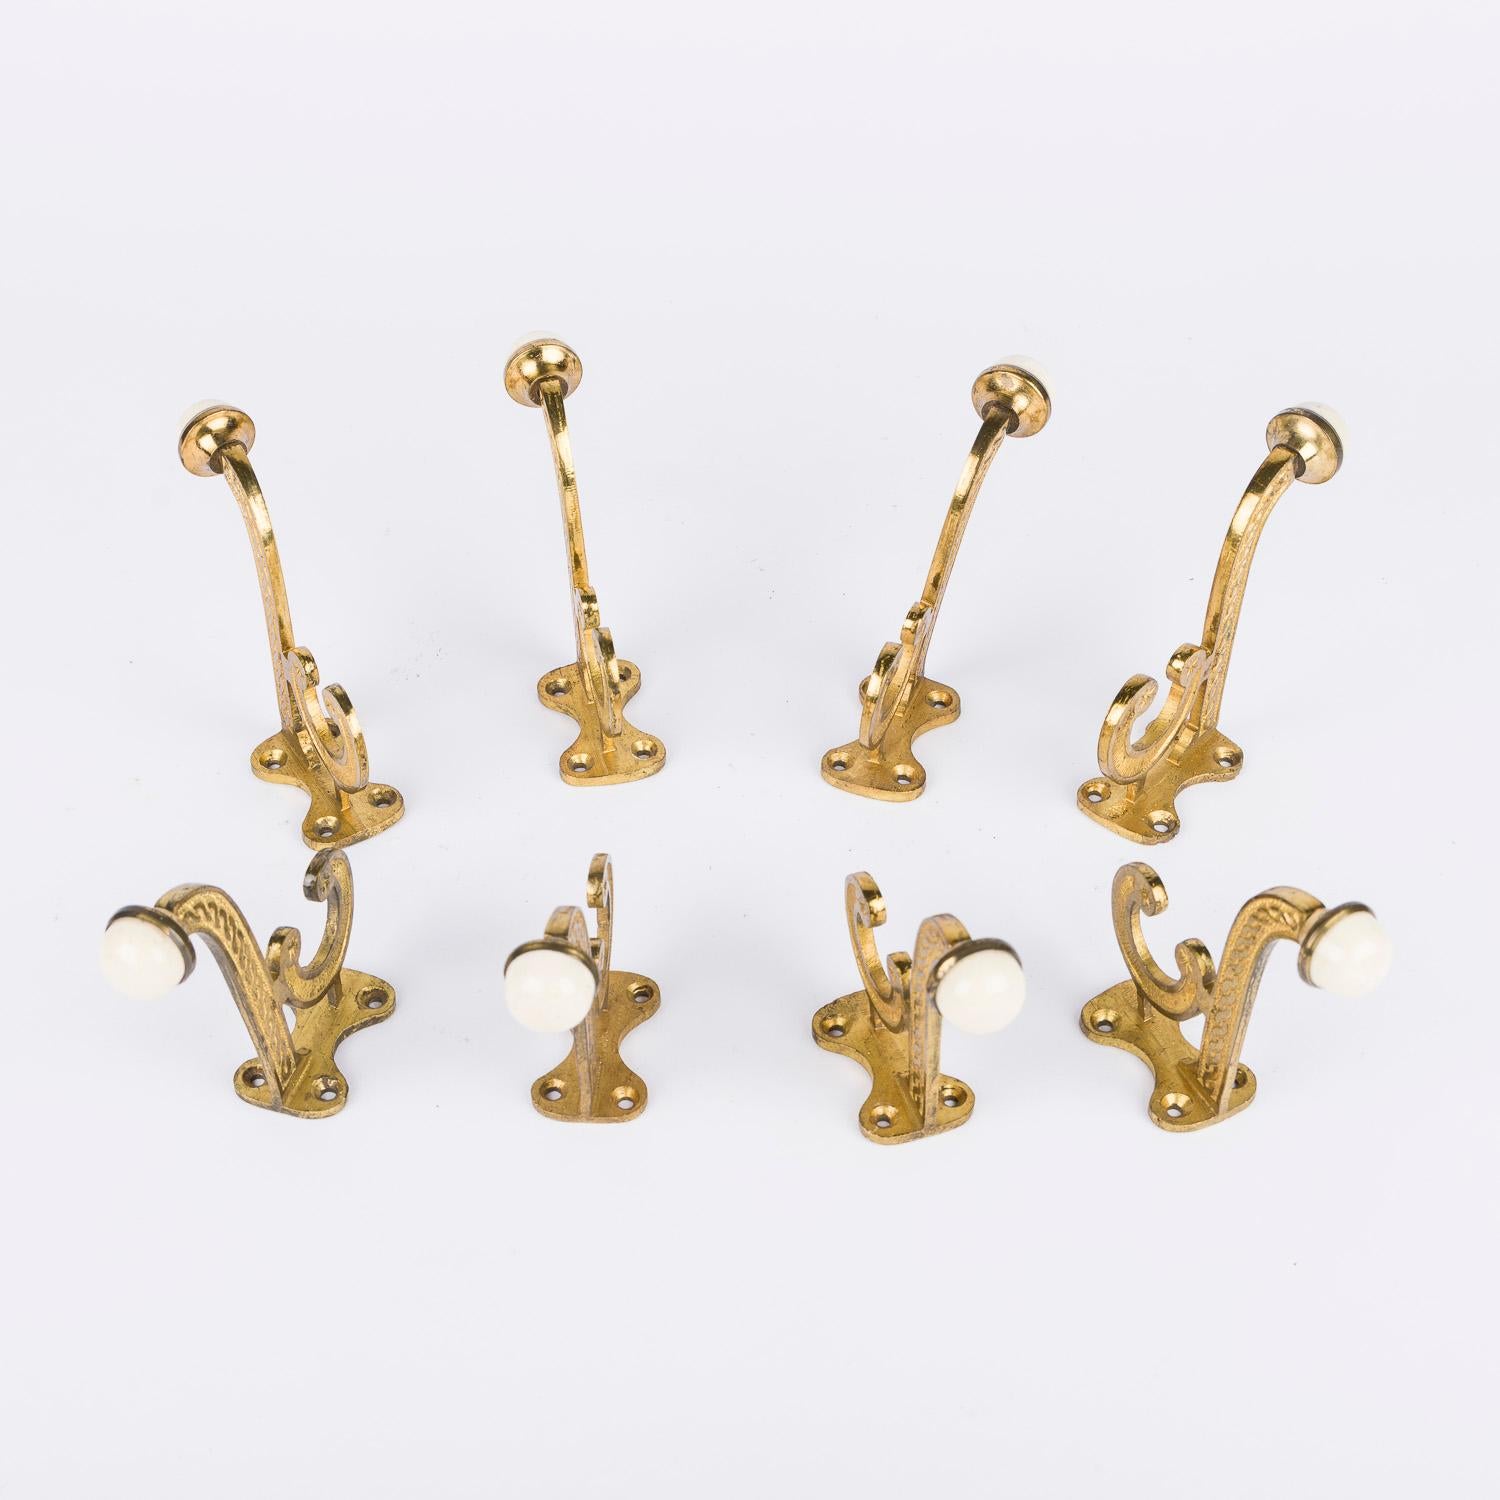 A set of 8 Victorian gilt brass hooks with white porcelain finials.

Can be wall or door mounted for hanging of coat, hats, etc.

Projection from wall: 4 inches - 10 cm.